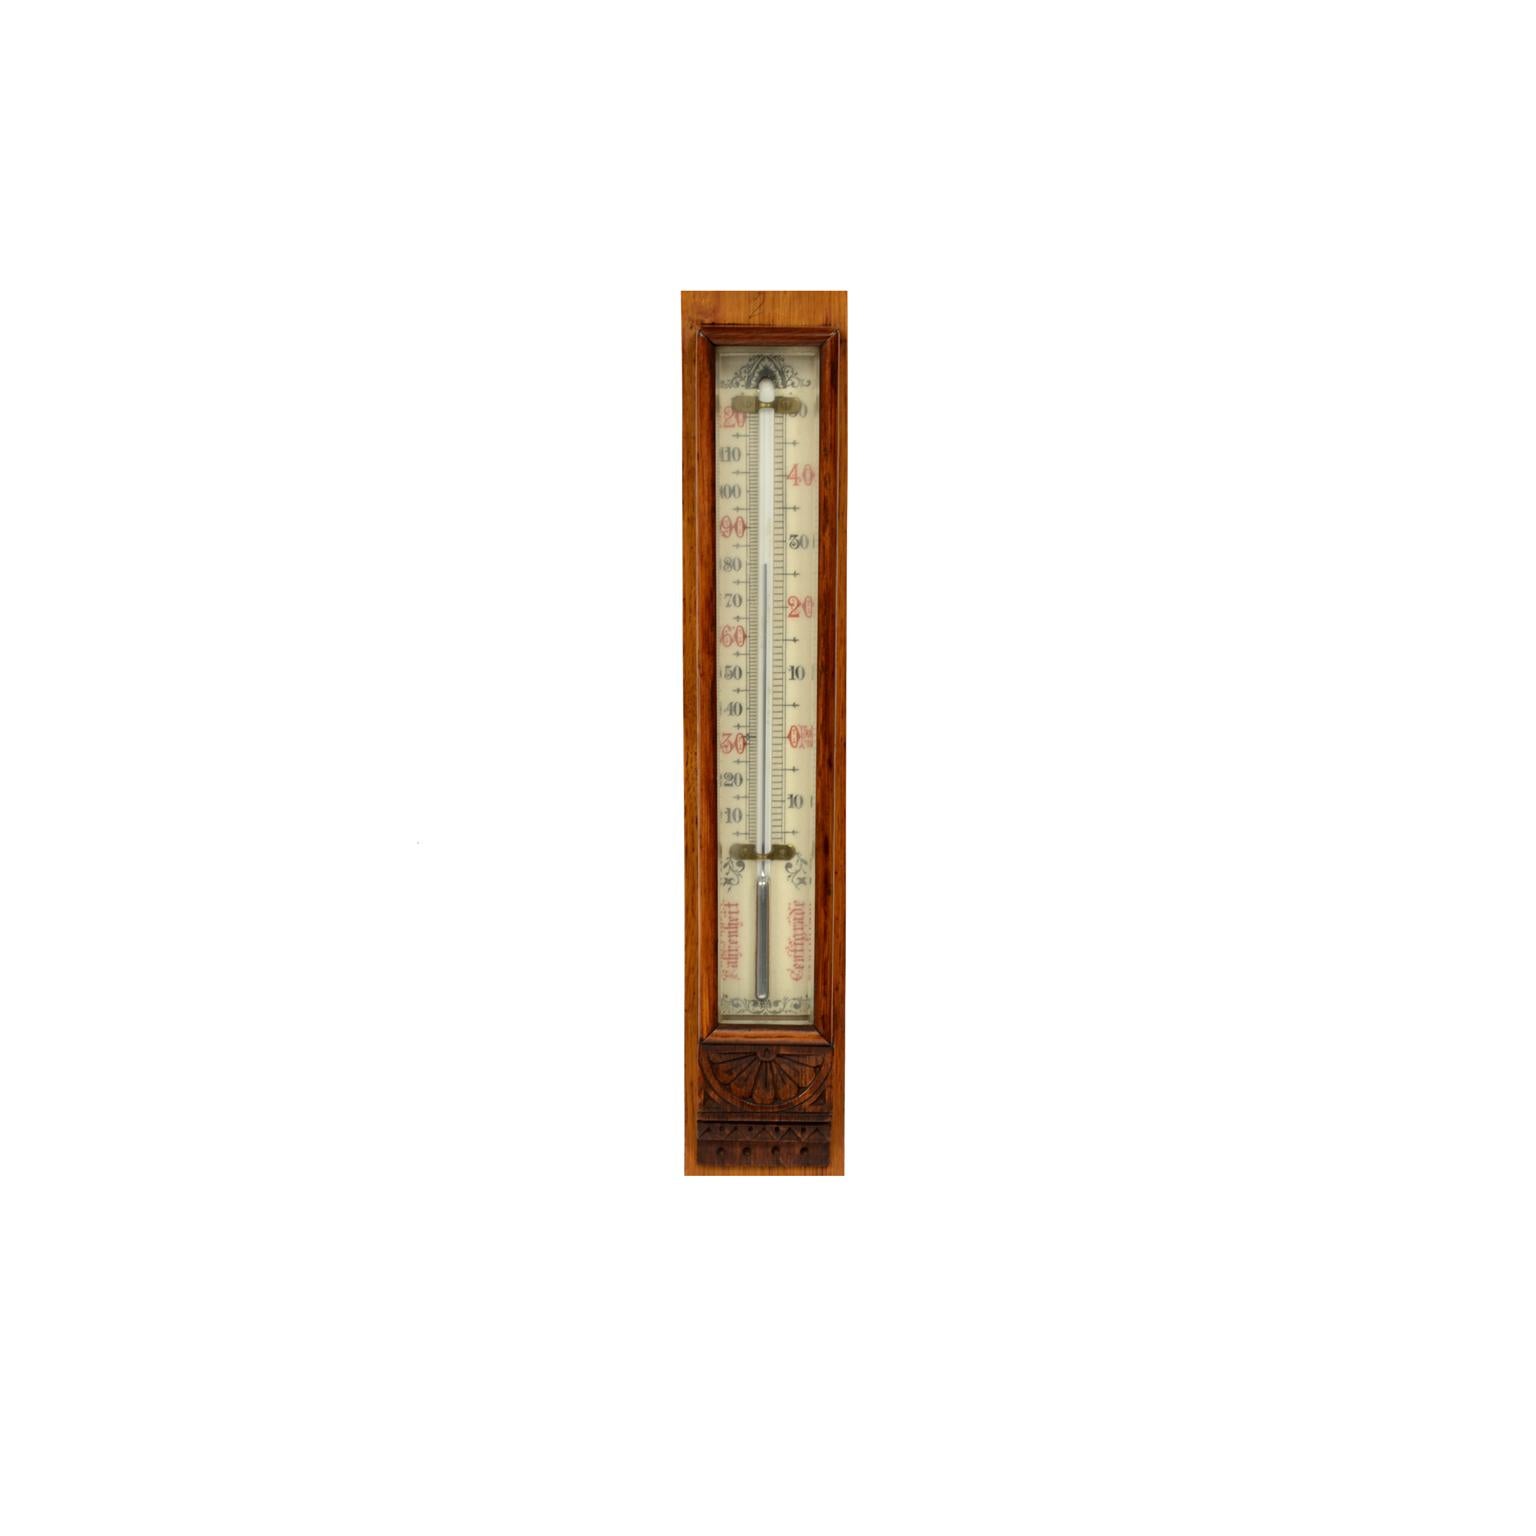 Late 19th Century J. H. Stewar Barometer and Thermometer Antique Weather Misure For Sale 9